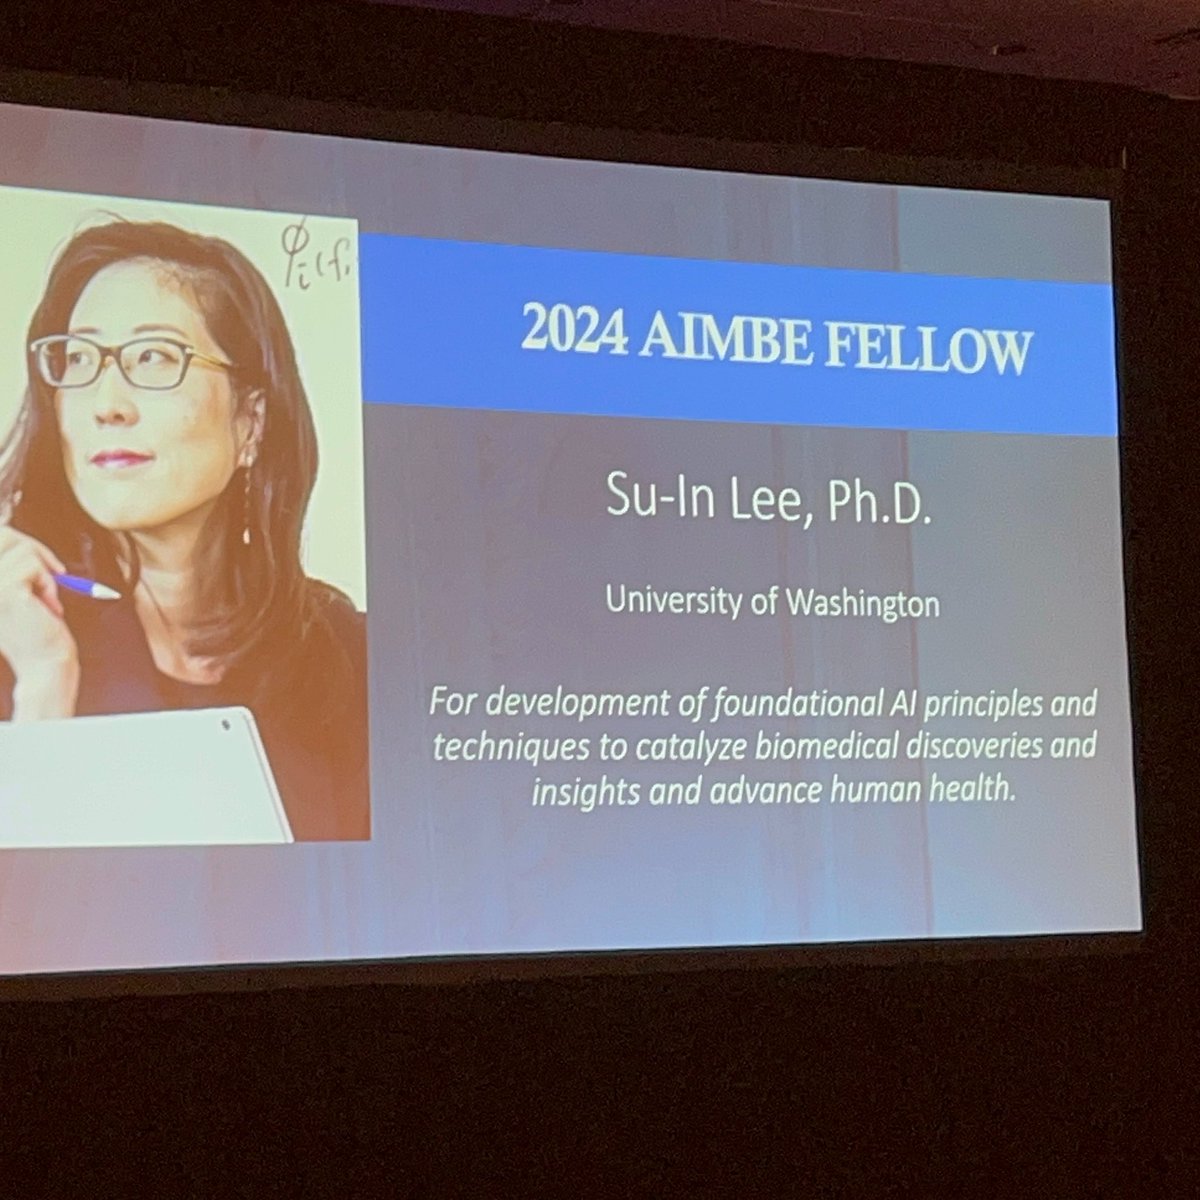 Excited to share that after a long embargo period, I've become a Fellow of @aimbe today! Grateful for the opportunity to collaborate with incredible students and collaborators.